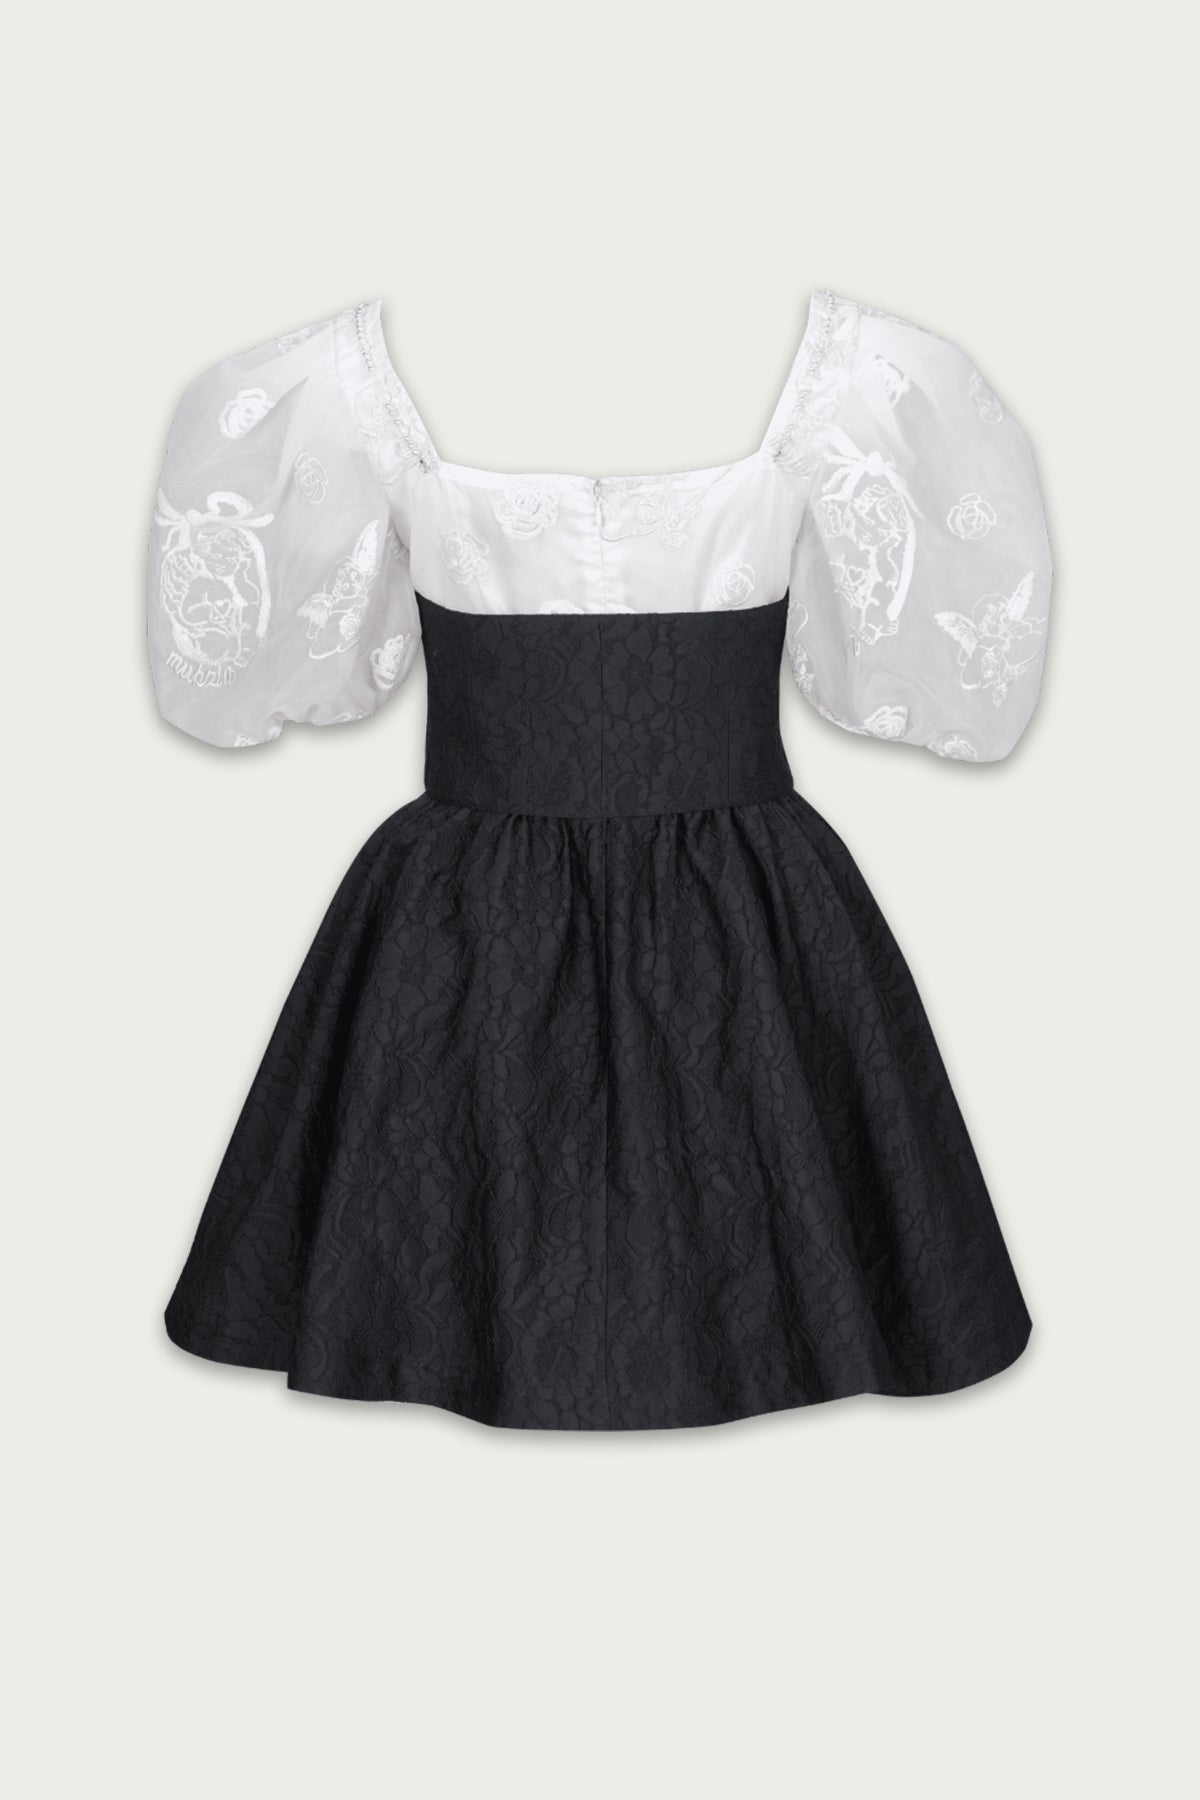 Mukzin | Black And White Fluffy Dress - Tiger Sniffing Rose